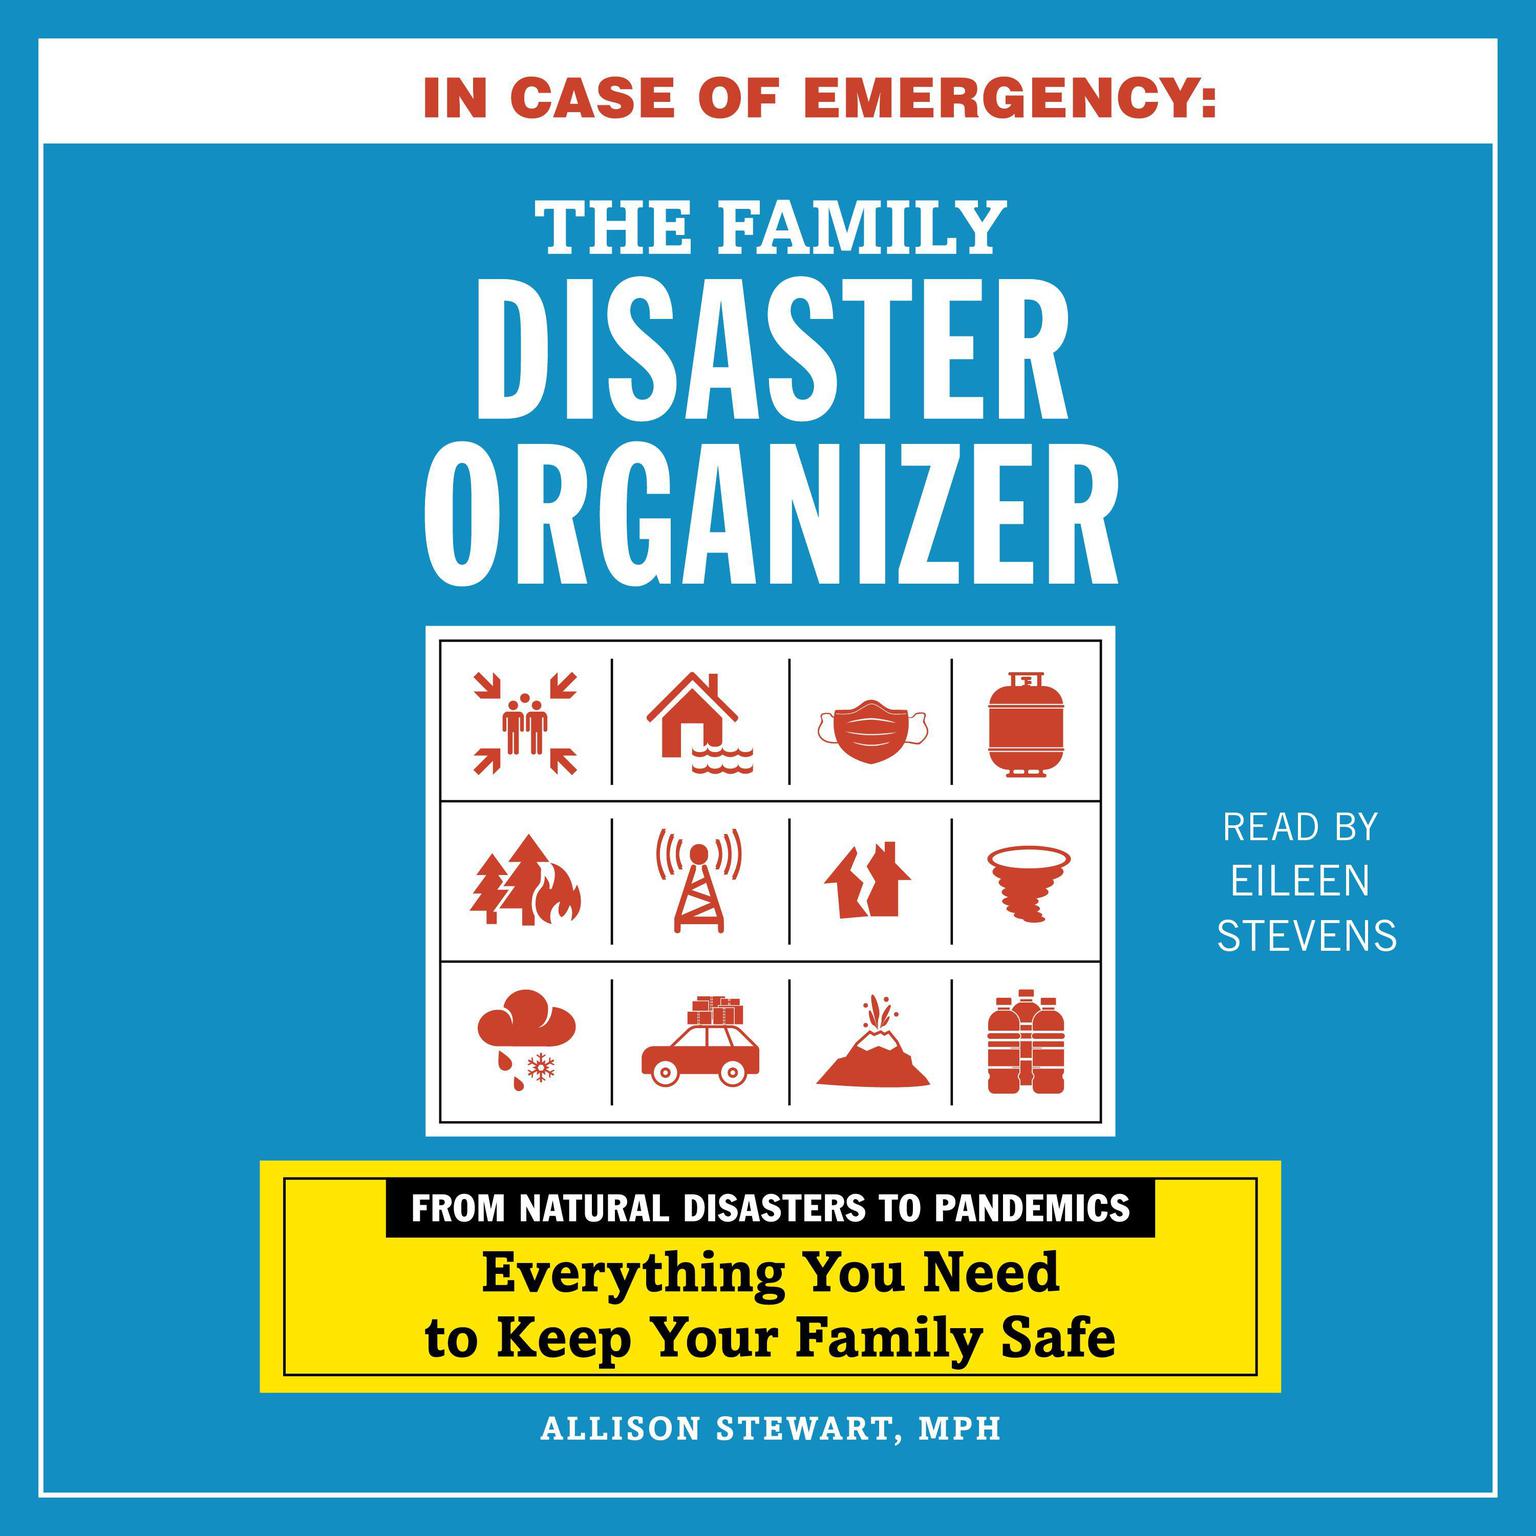 In Case of Emergency: The Family Disaster Organizer: From Natural Disasters to Pandemics, Everything You Need to Keep Your Family Safe Audiobook, by Allison Stewart